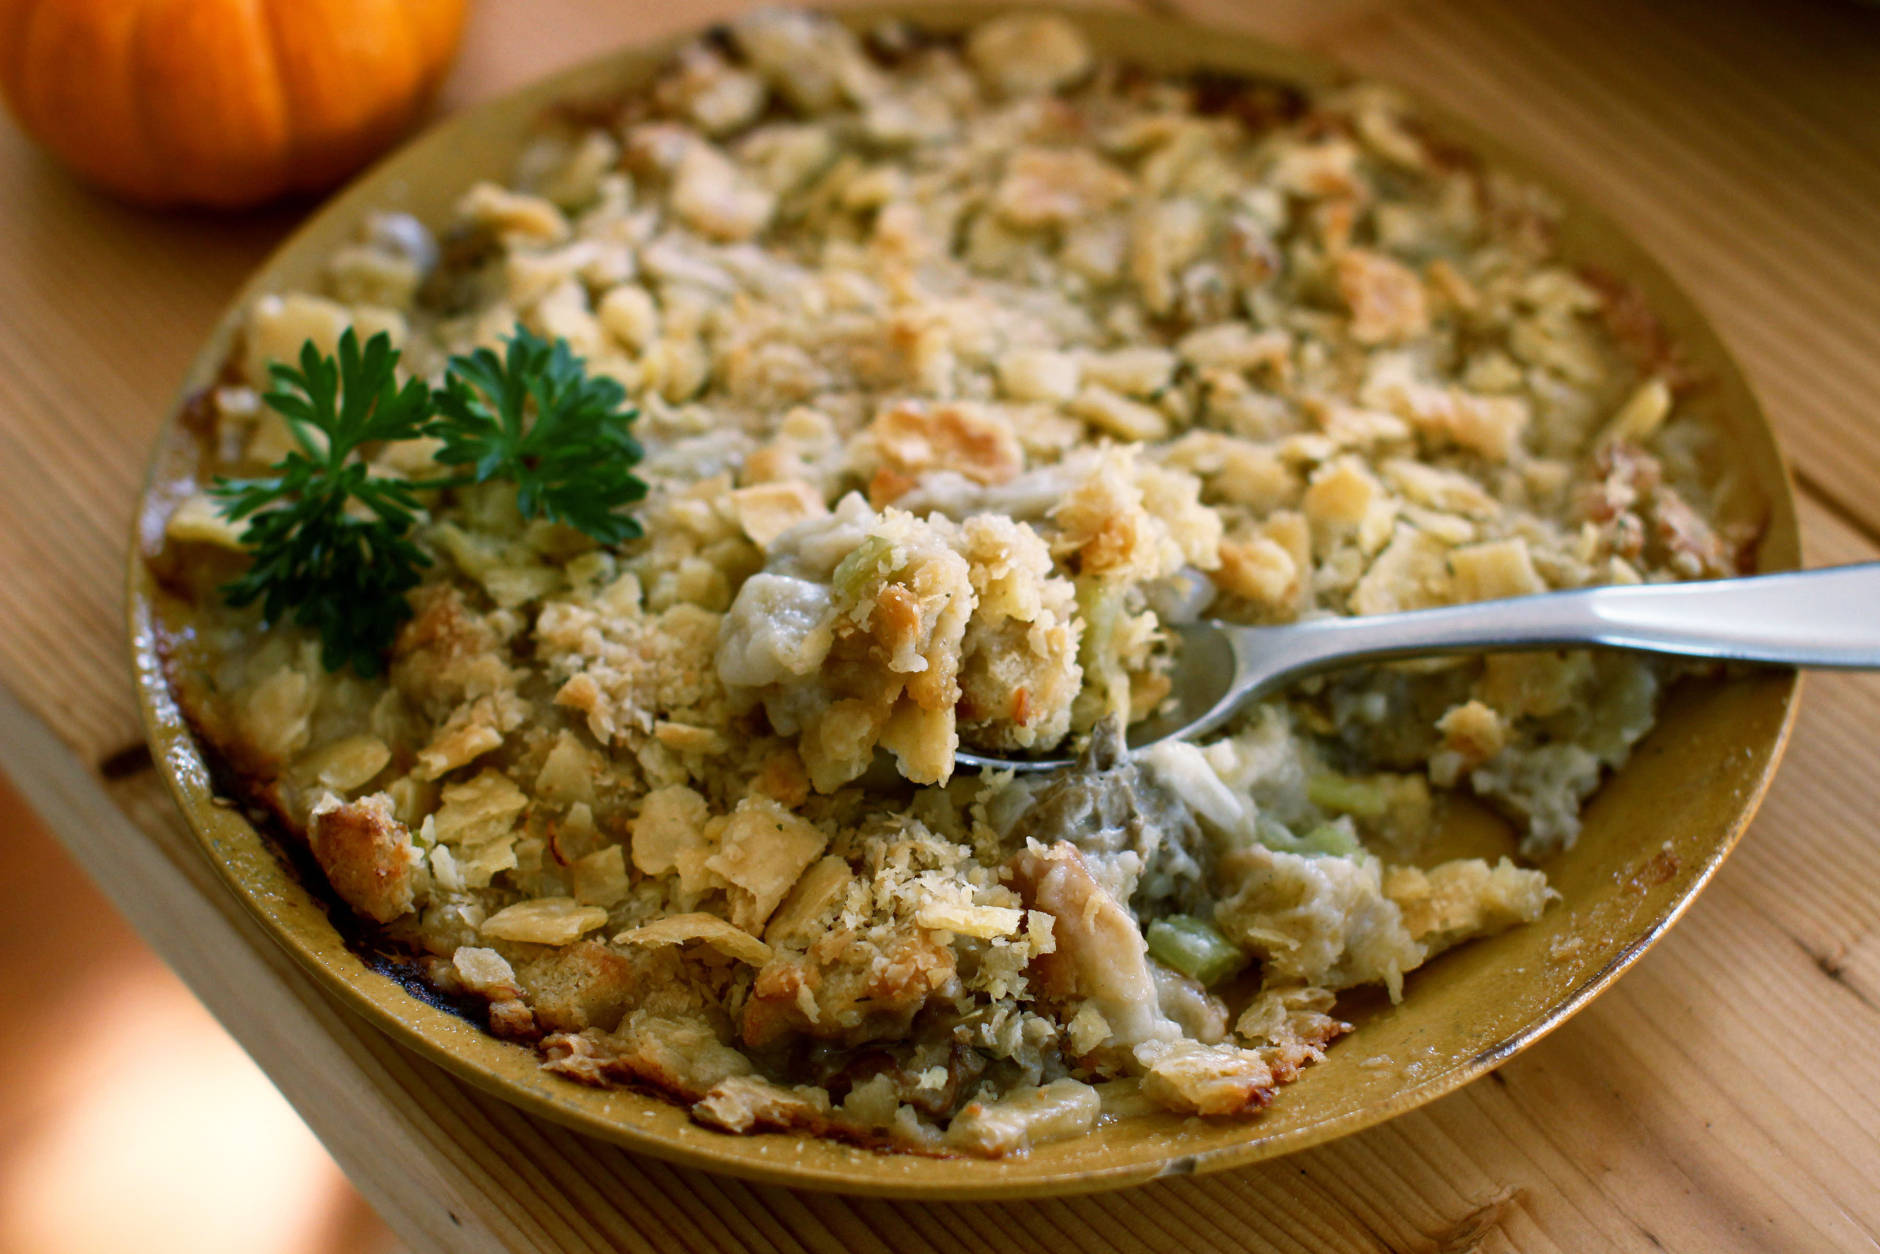 This Sept. 14, 2015 photo shows Thanksgiving oyster dressing in Concord, N.H. This dish is from a recipe by Elizabeth Karmel. (AP Photo/Matthew Mead)